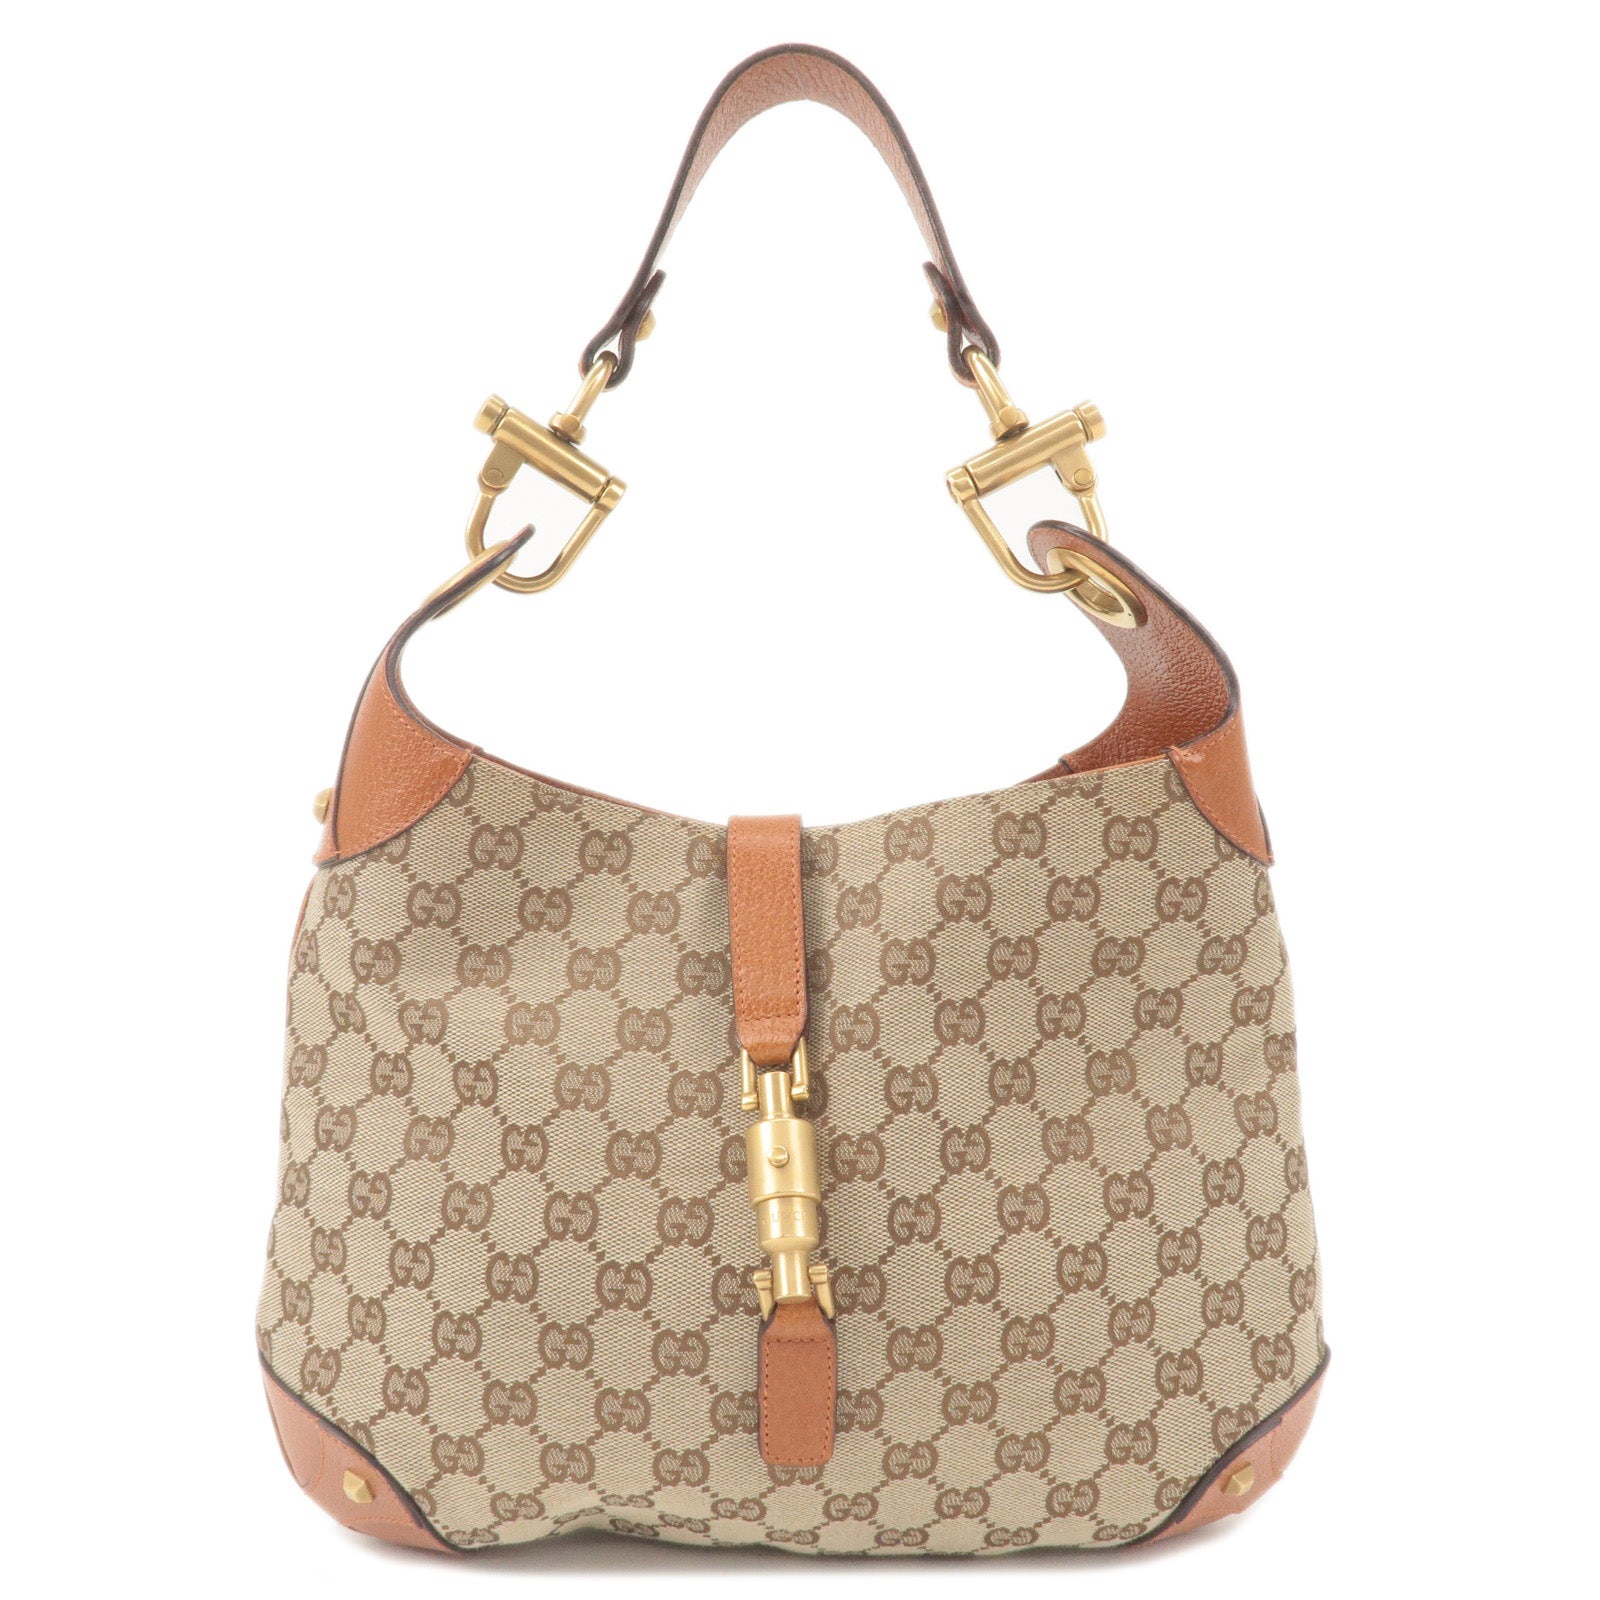 GUCCI-New-Jackie-GG-Canvas-Leather-Shoulder-Bag-Brown-120888